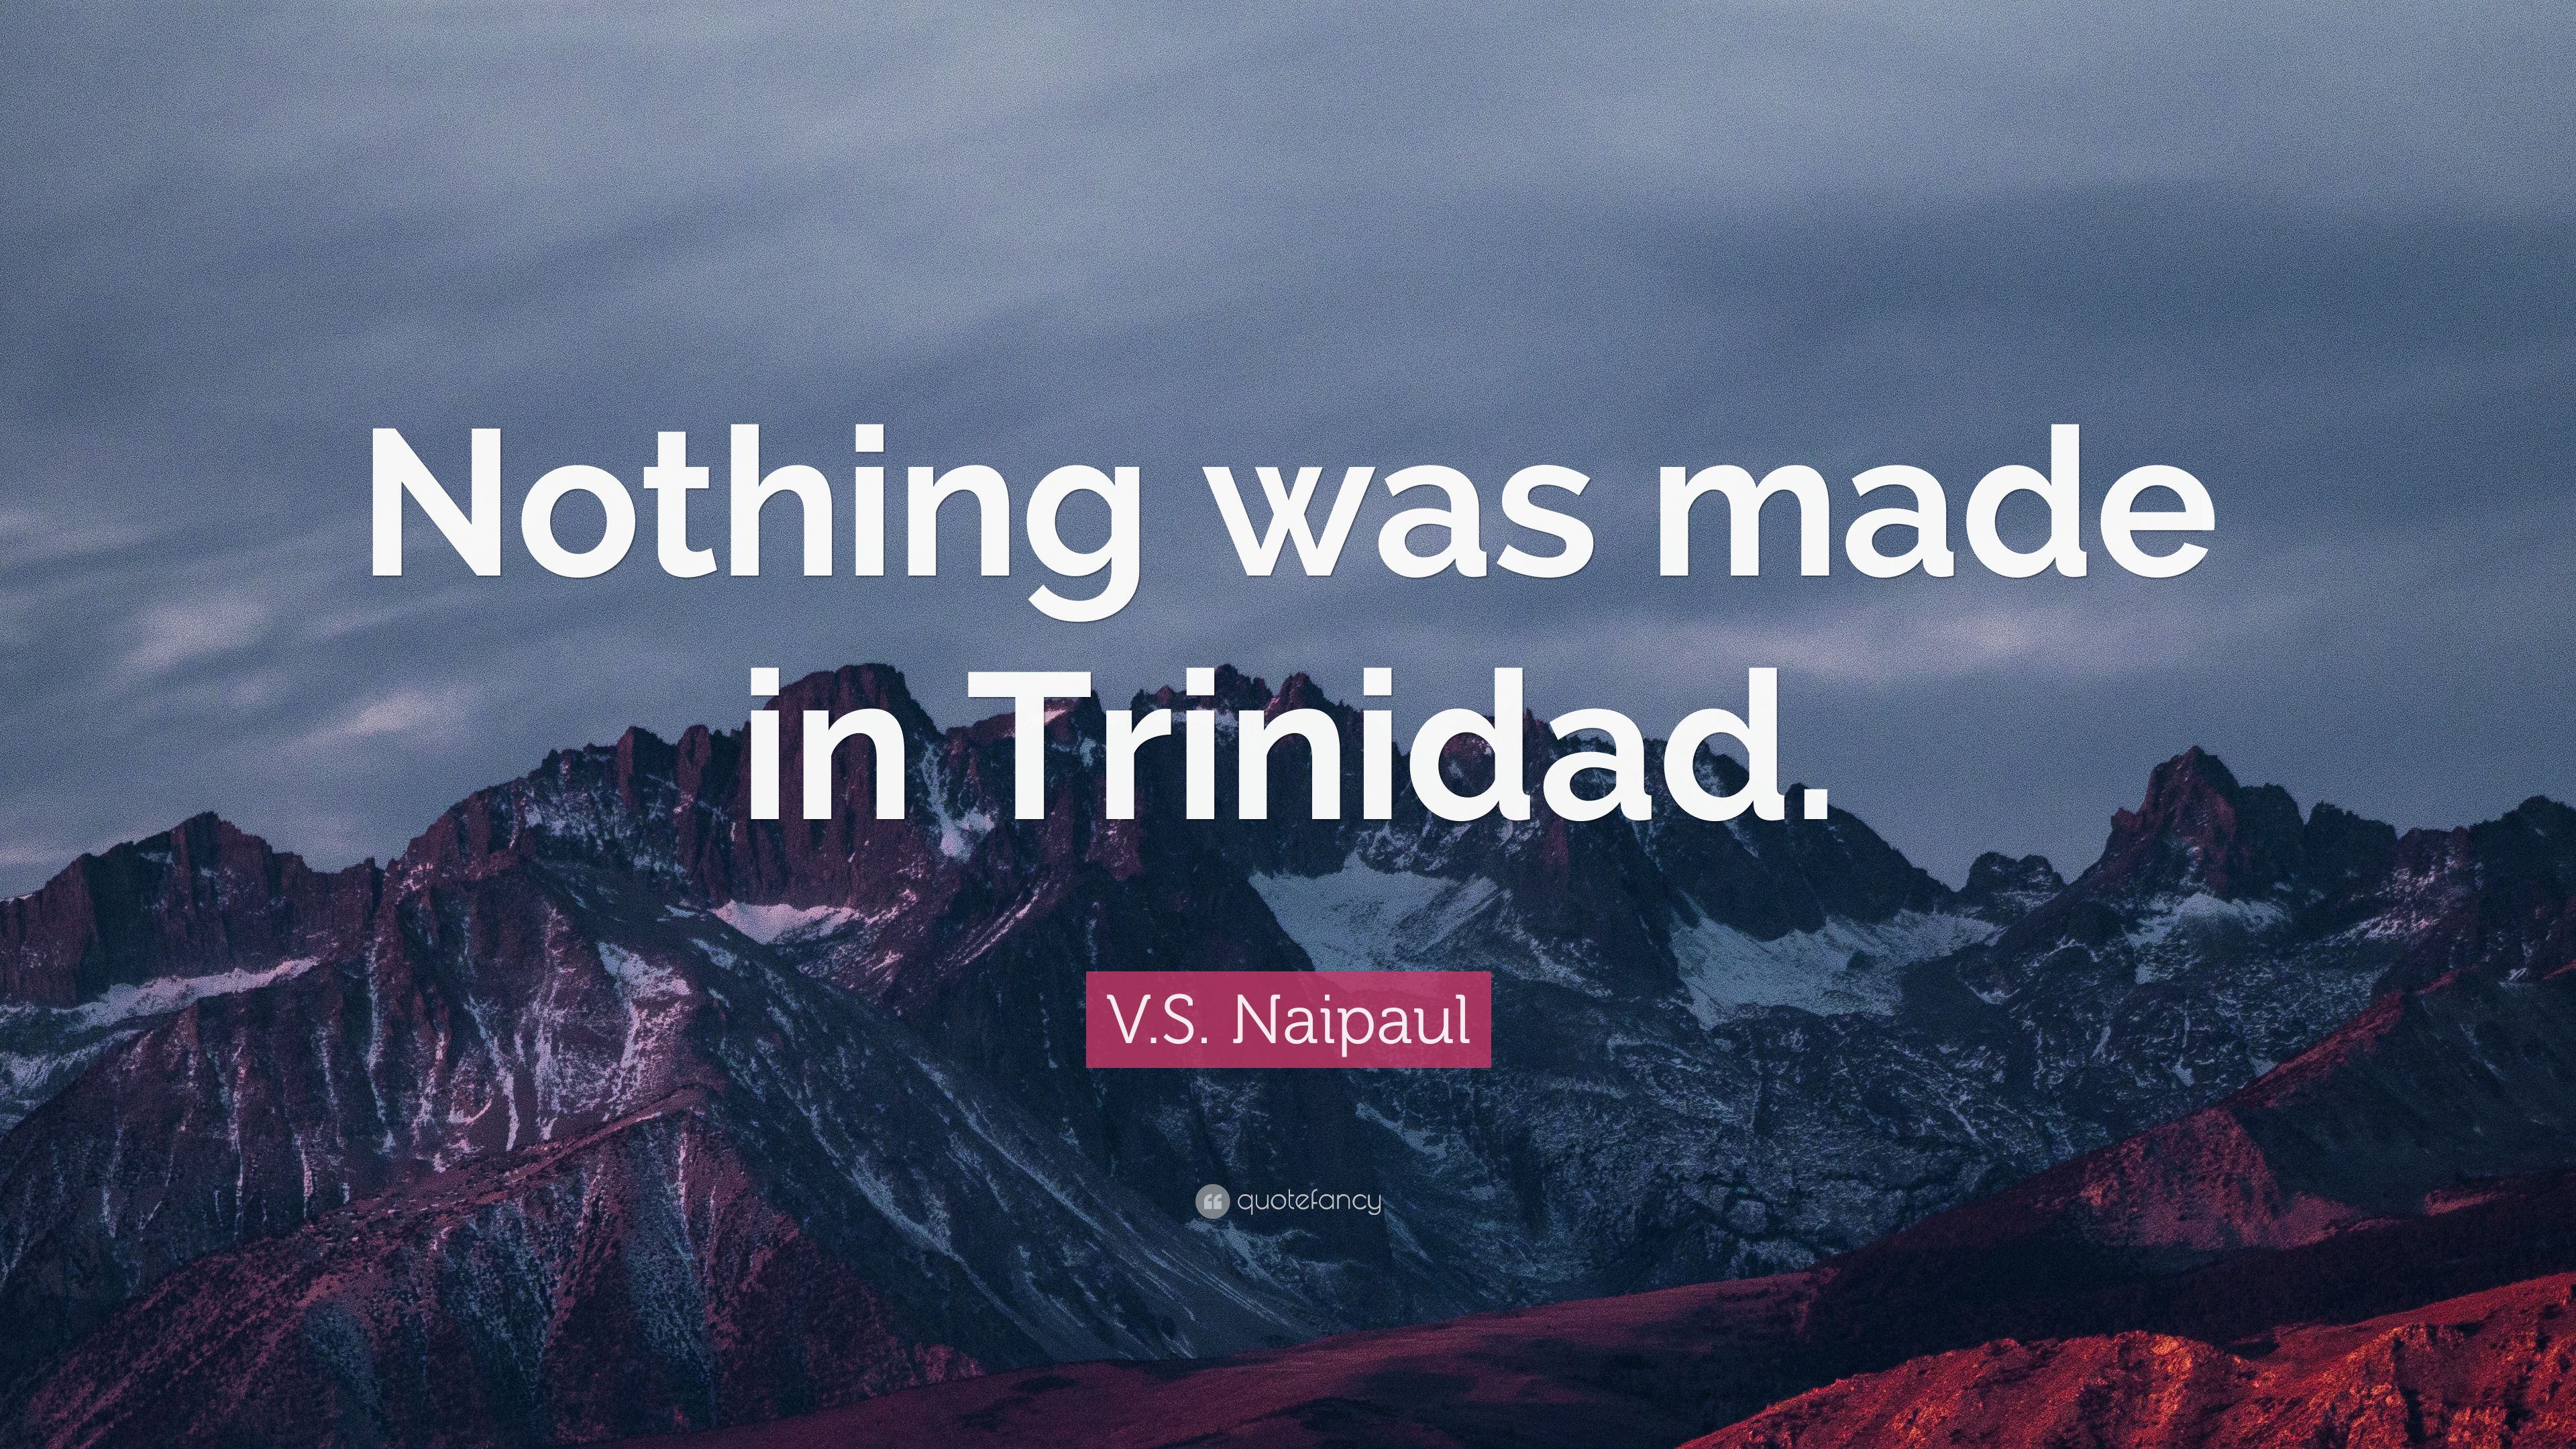 V.S. Naipaul Quote: “Nothing was made in Trinidad.” 7 wallpaper